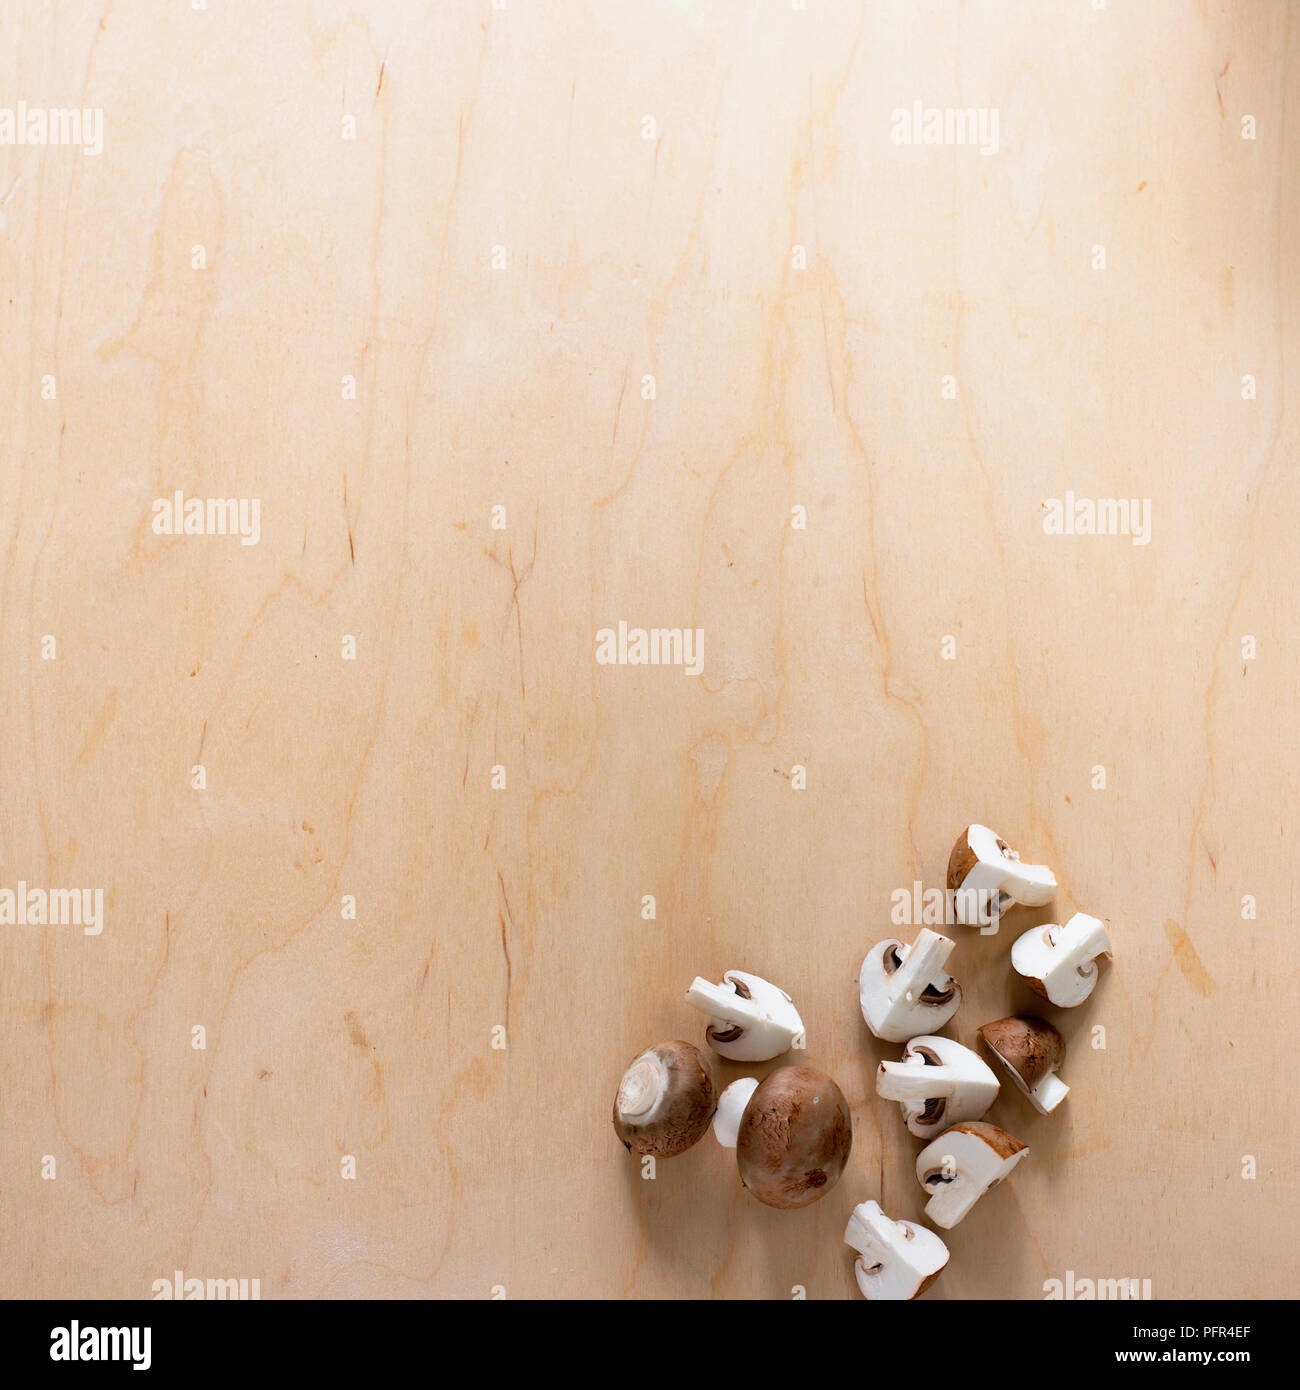 Chestnut mushrooms whole and quartered, on wooden surface Stock Photo